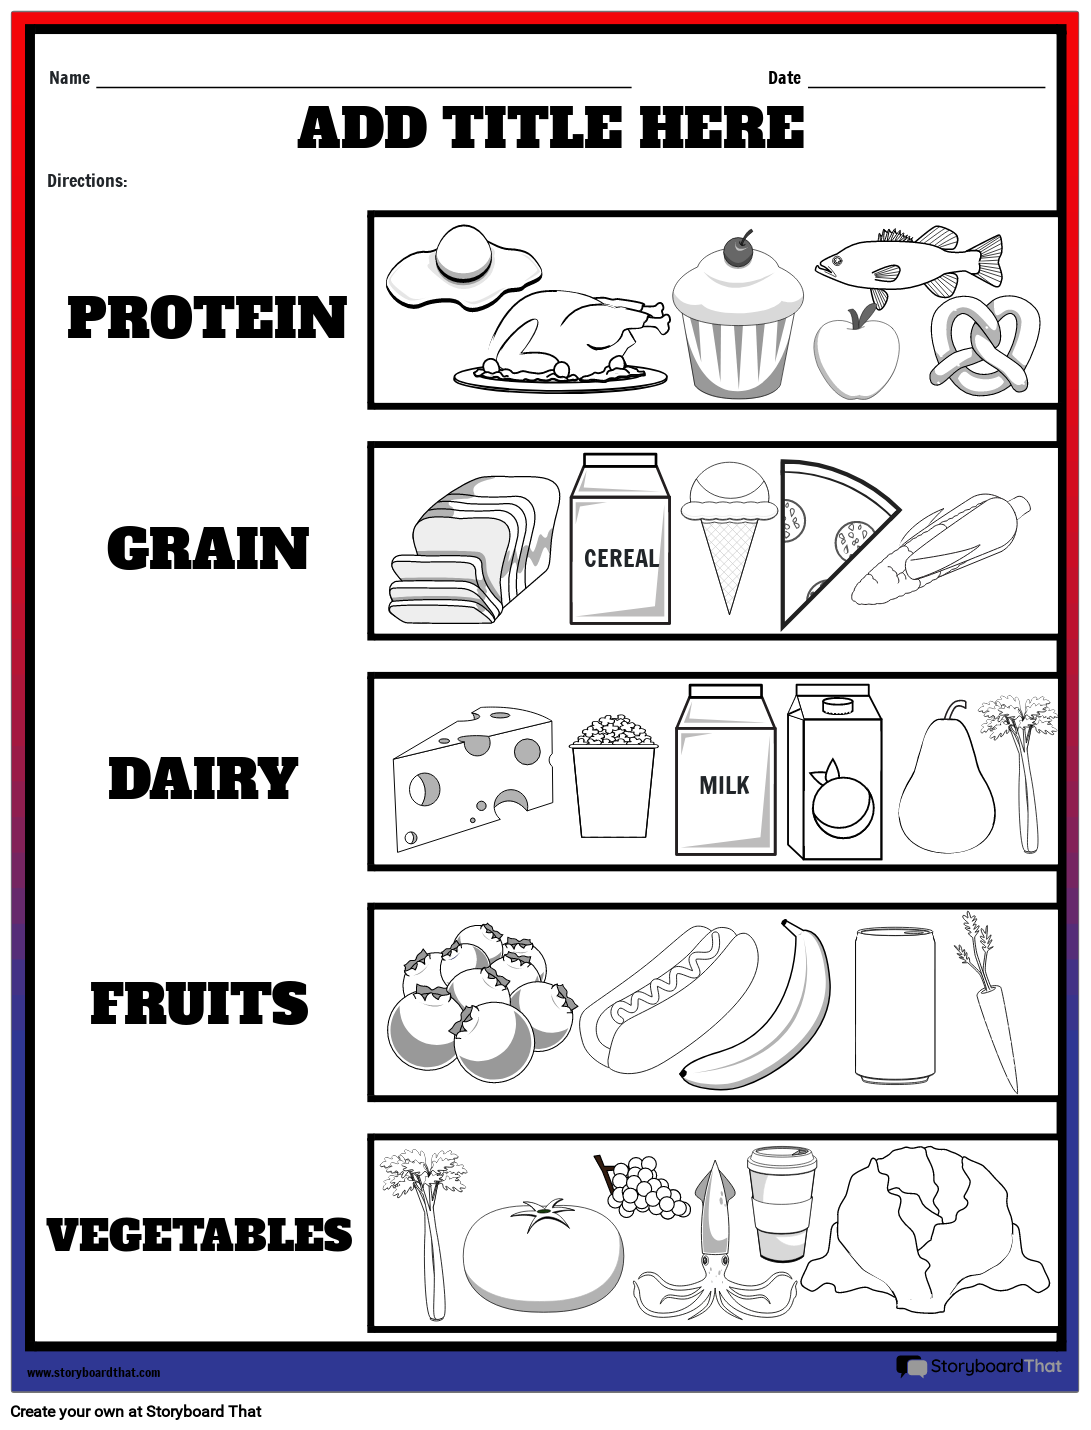 Nutrition Worksheets: Free Printable Ideas And Templates pertaining to Free Printable Healthy Eating Worksheets